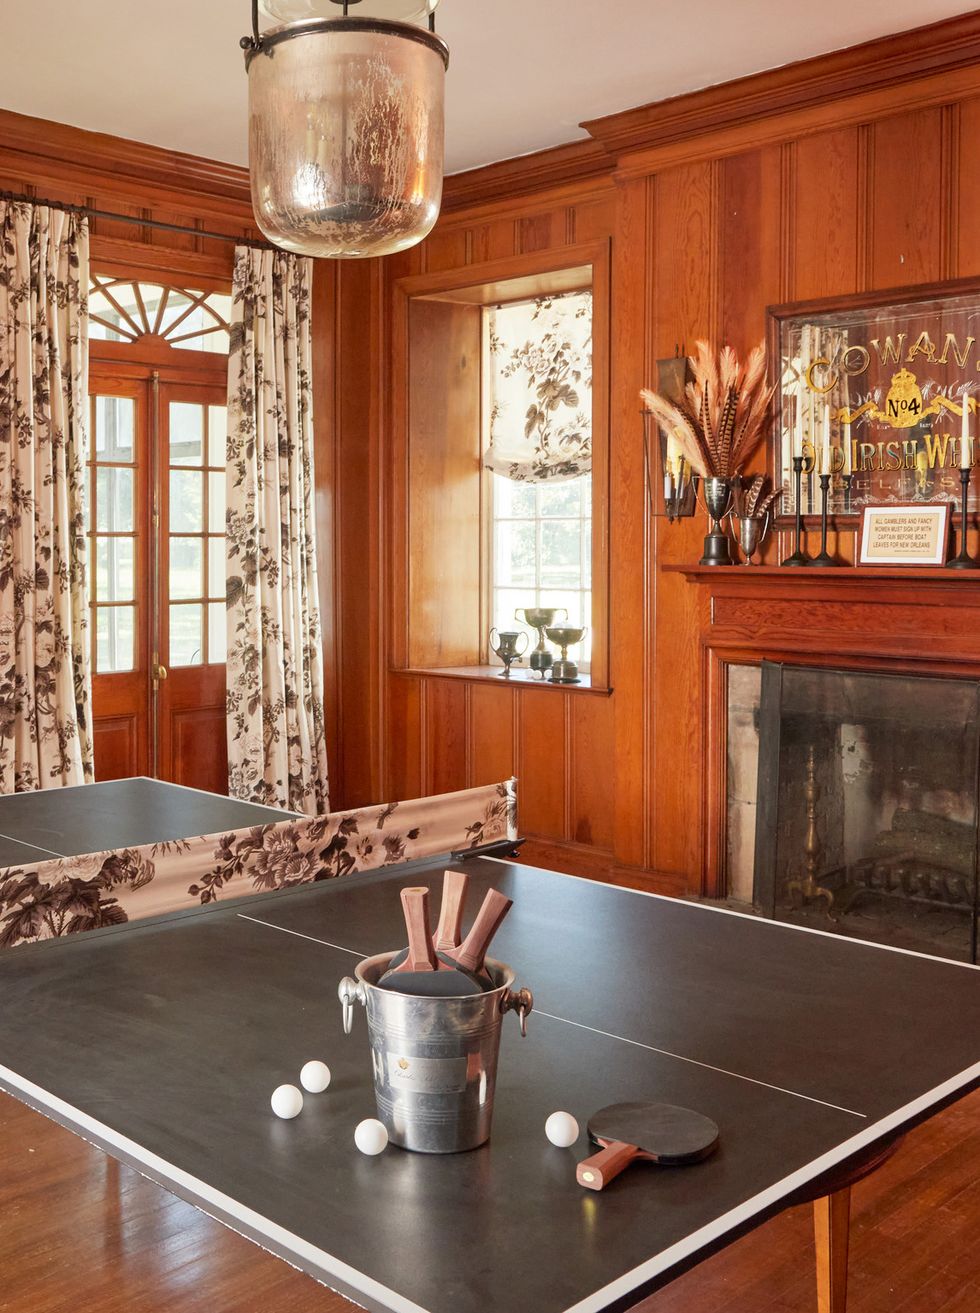 ping pong table with floral fabric net in wood paneled room